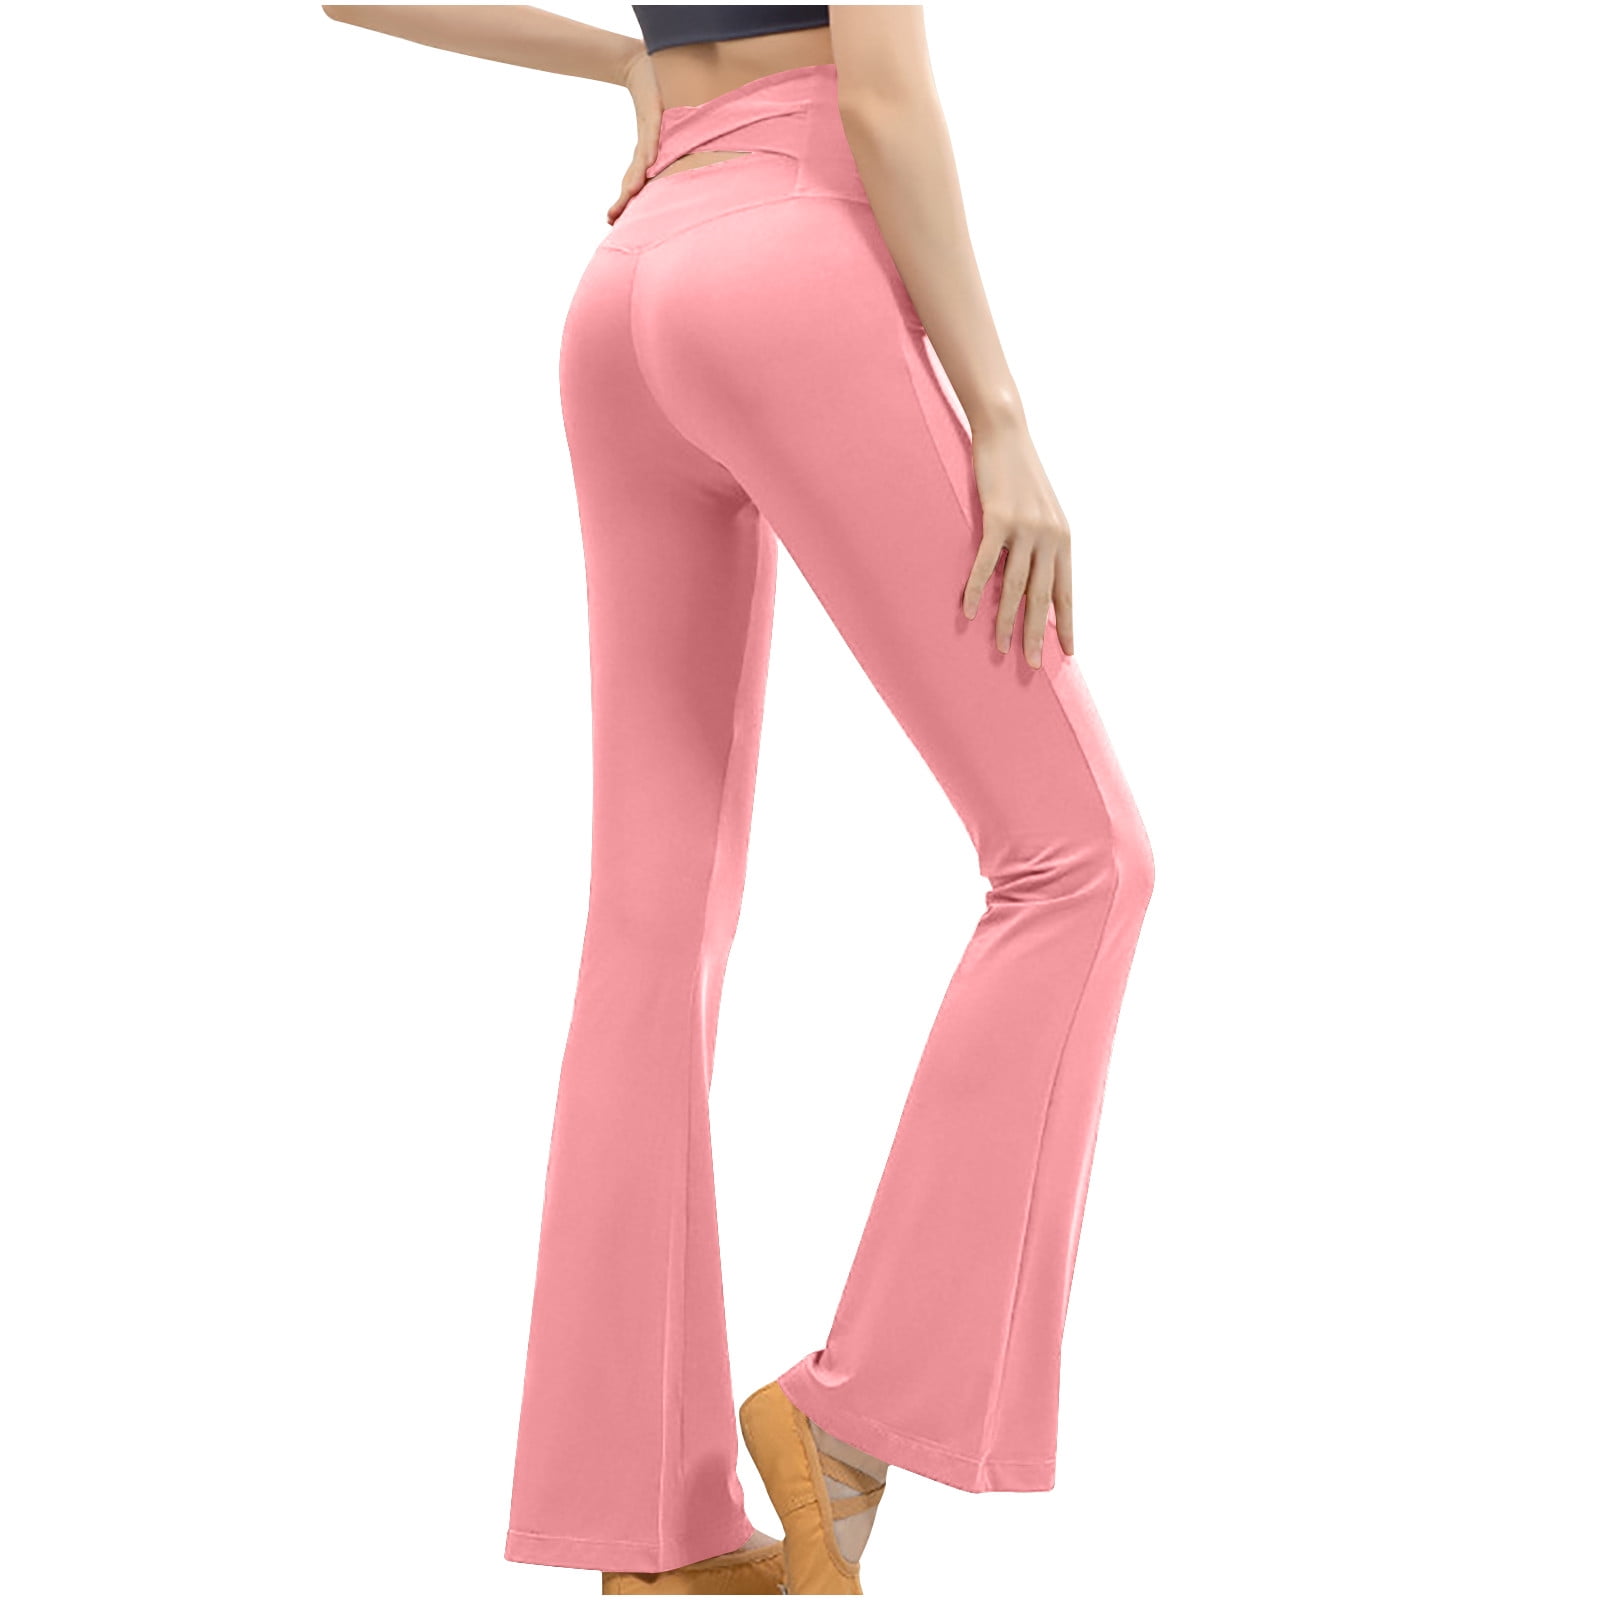 Zodggu Women's Solid Color Micro Flare High Waist And Hip Lifting Exercise  Fitness Yoga Pants Comfy Dressy Young Girls Love Linen Pants Cargo Pants  Hot Pink S 